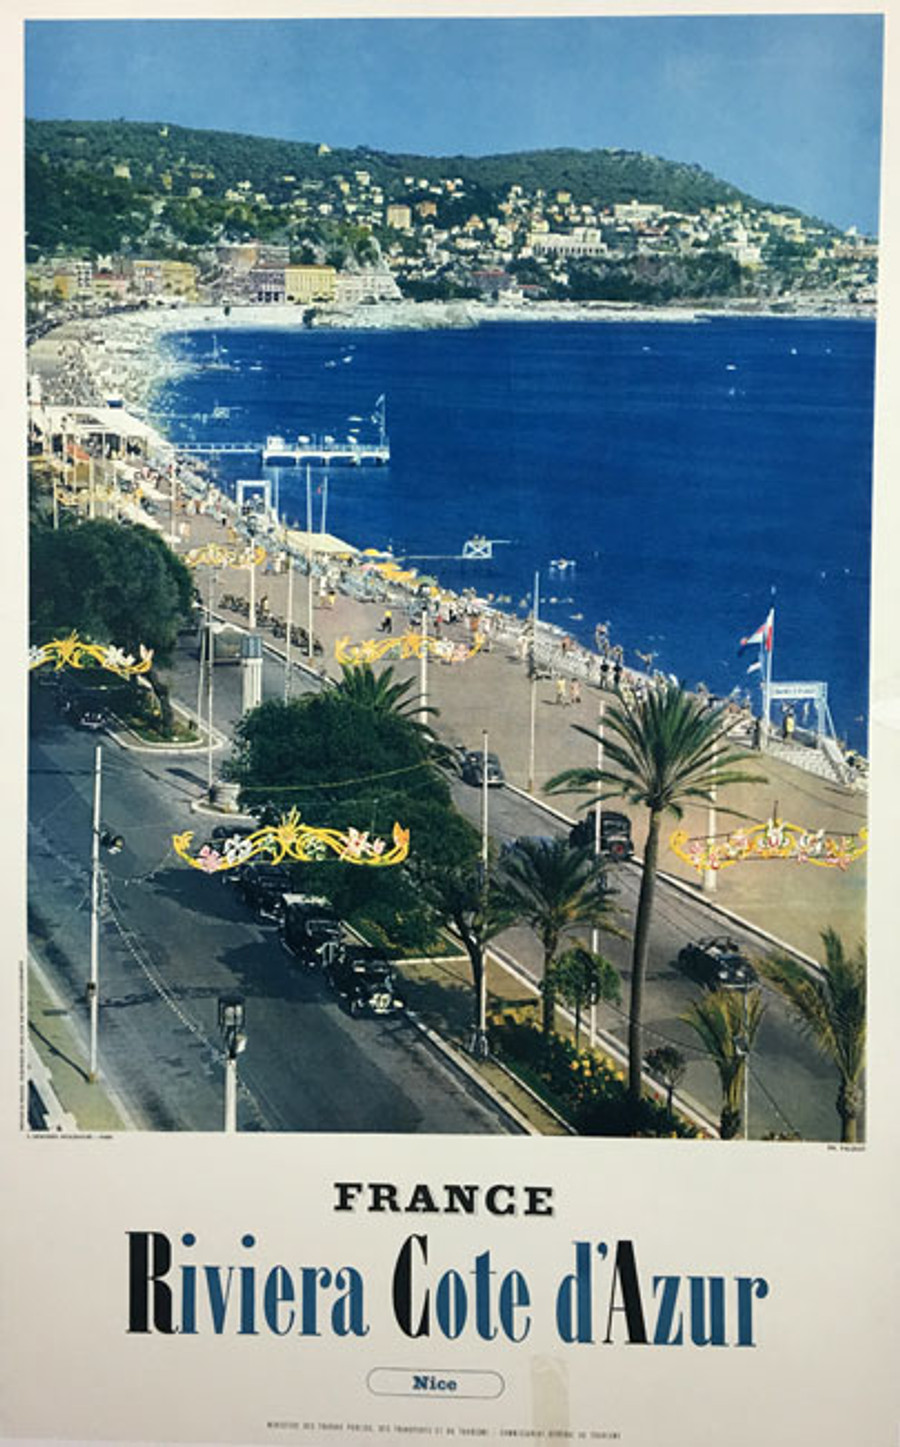 Riviera Cote d Azur French photogravure travel destination poster by Falquet circa 1960 depicts seaside town